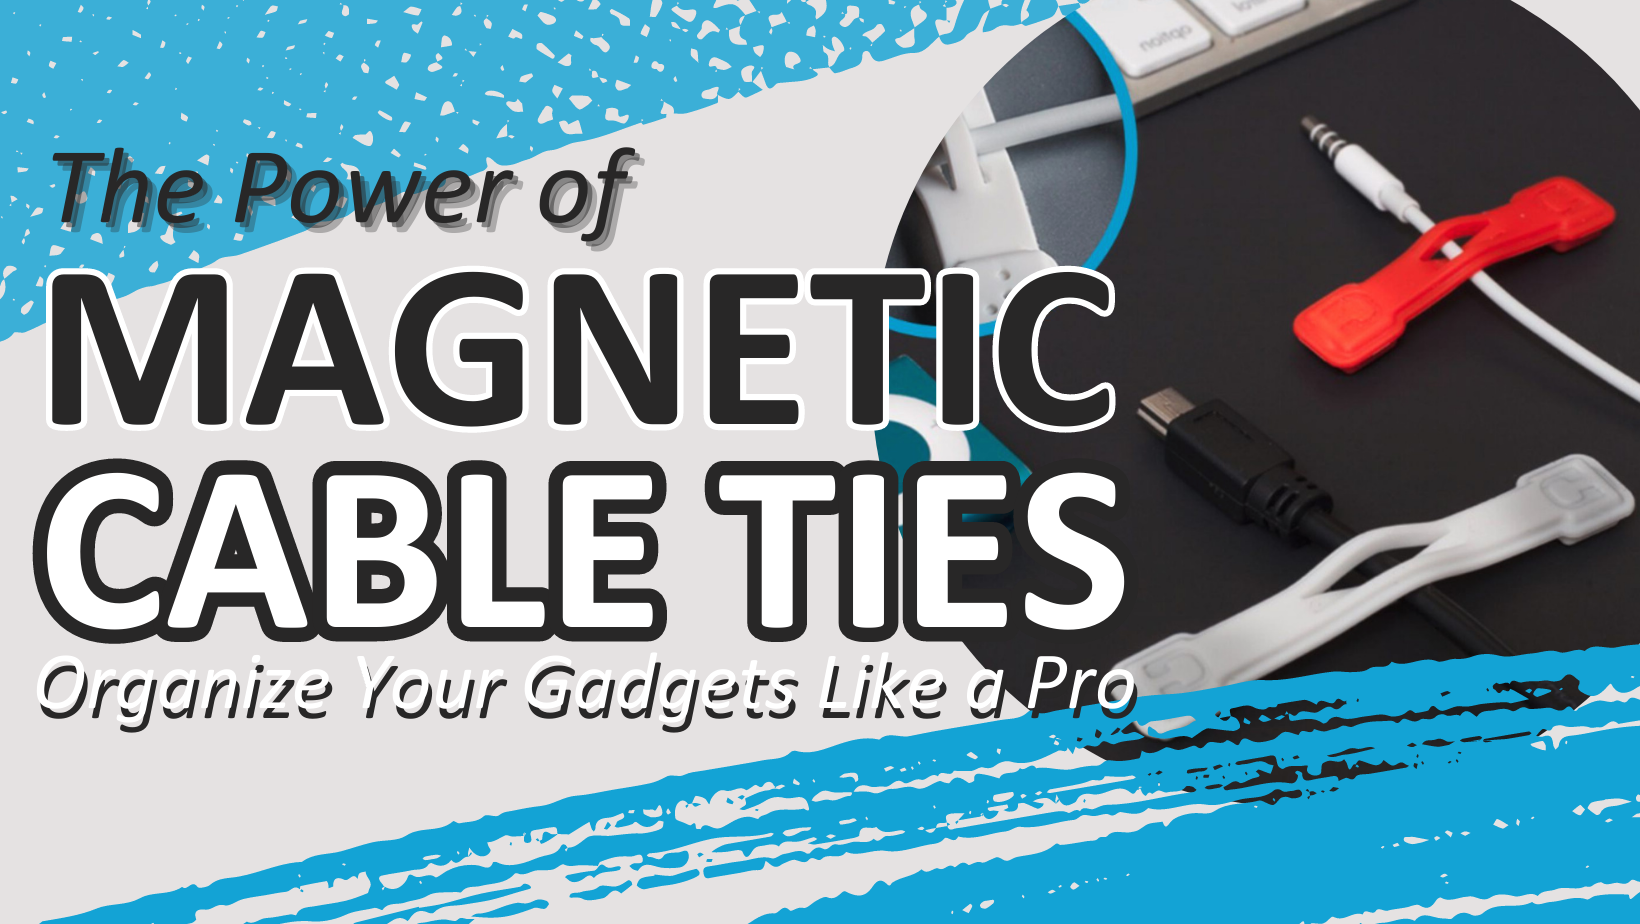 The Power of Magnetic Cable Ties: Organize Your Gadgets Like a Pro